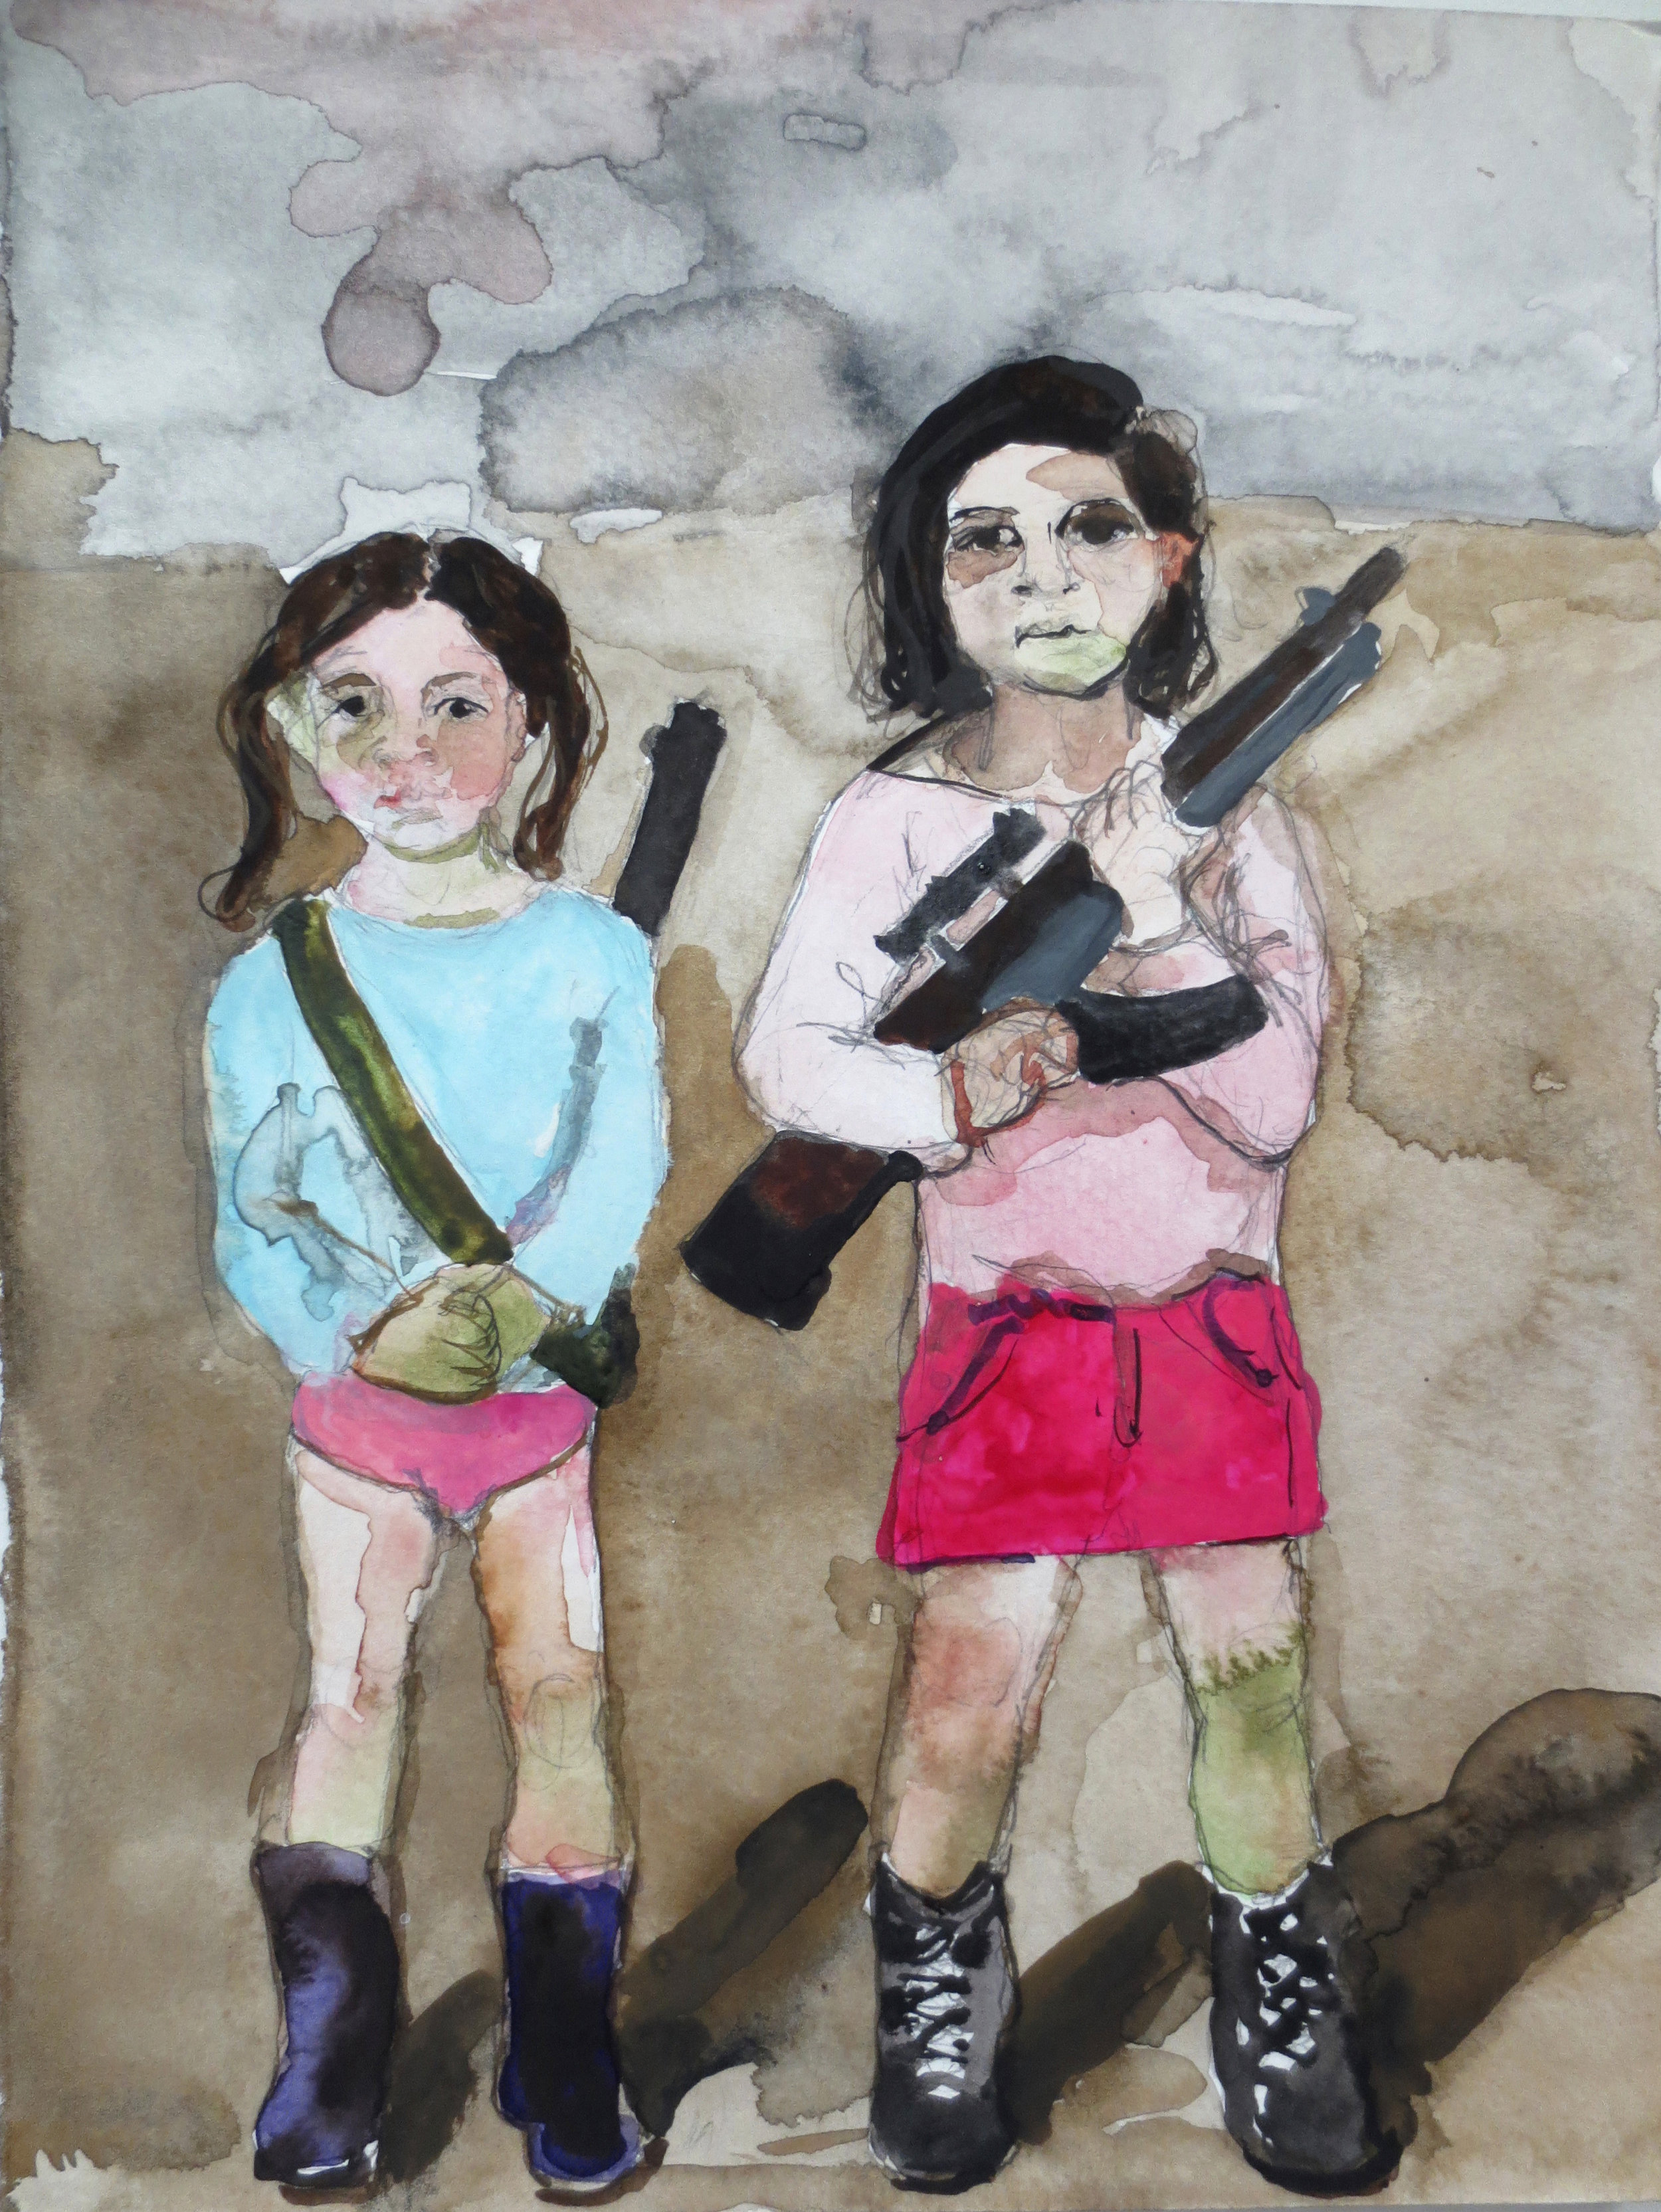 Girls with Guns, 2012, Graphite and watercolor on paper, 12 x 9 in.